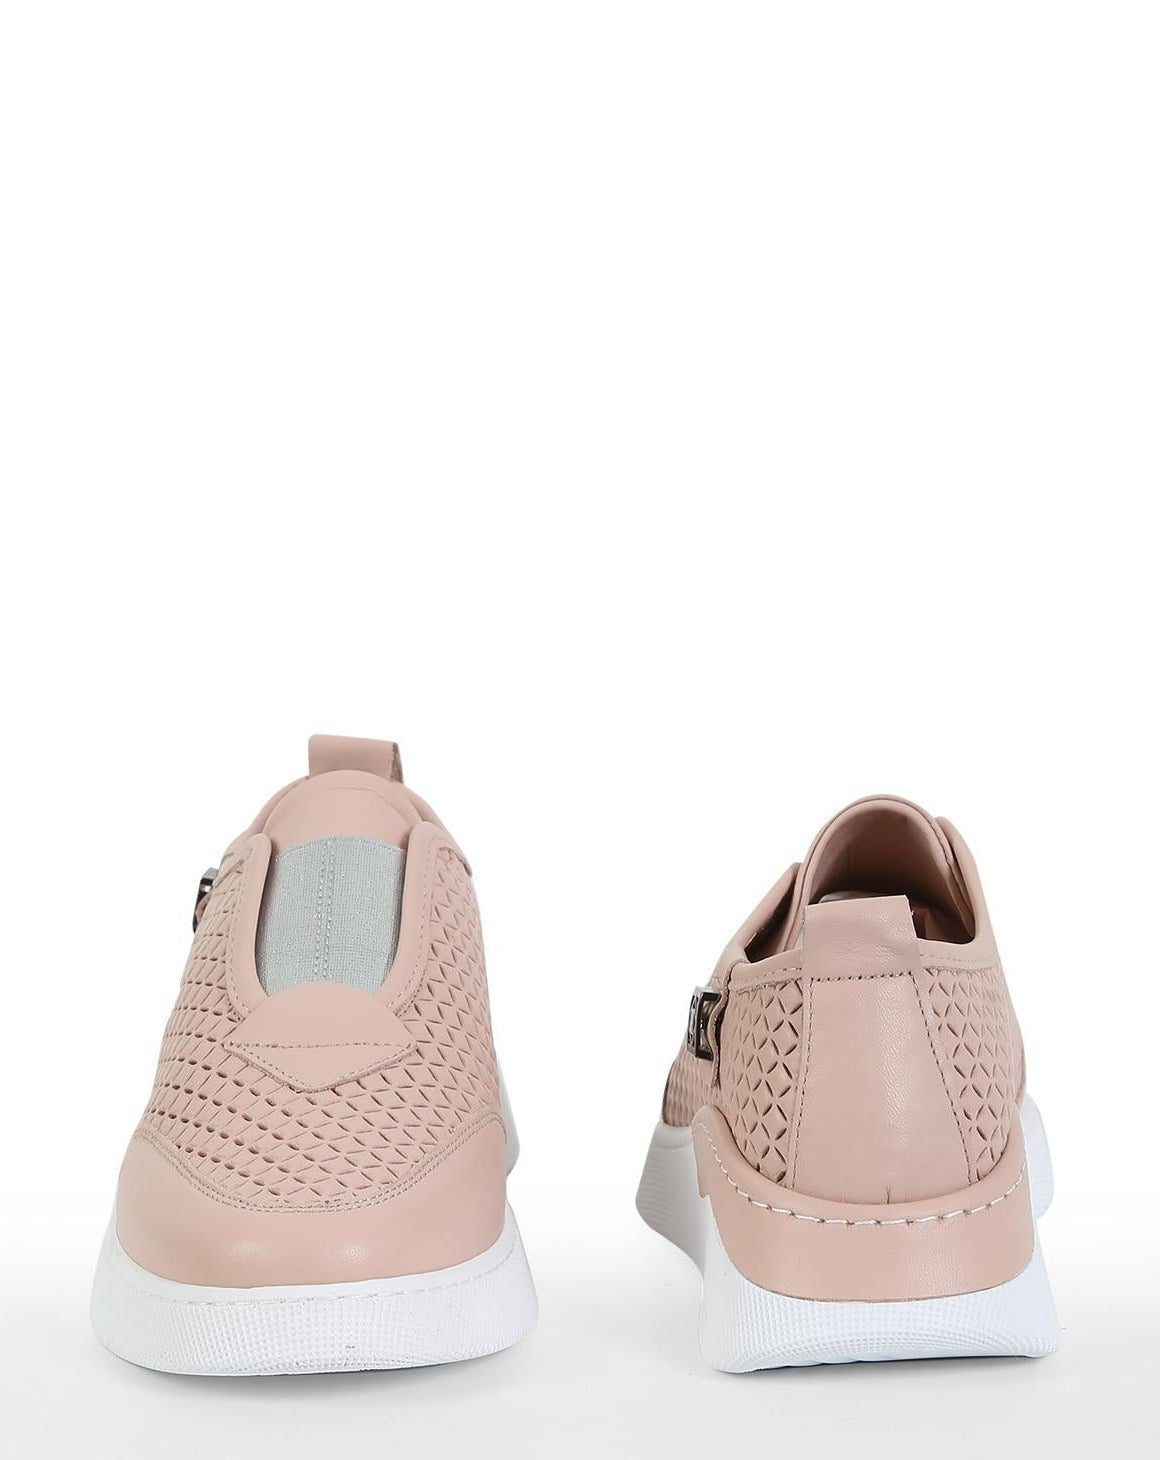 Margiela Rose 100% Leather Women's Sneakers, Breathable Leather, Urban Street Style for Everyday Chic